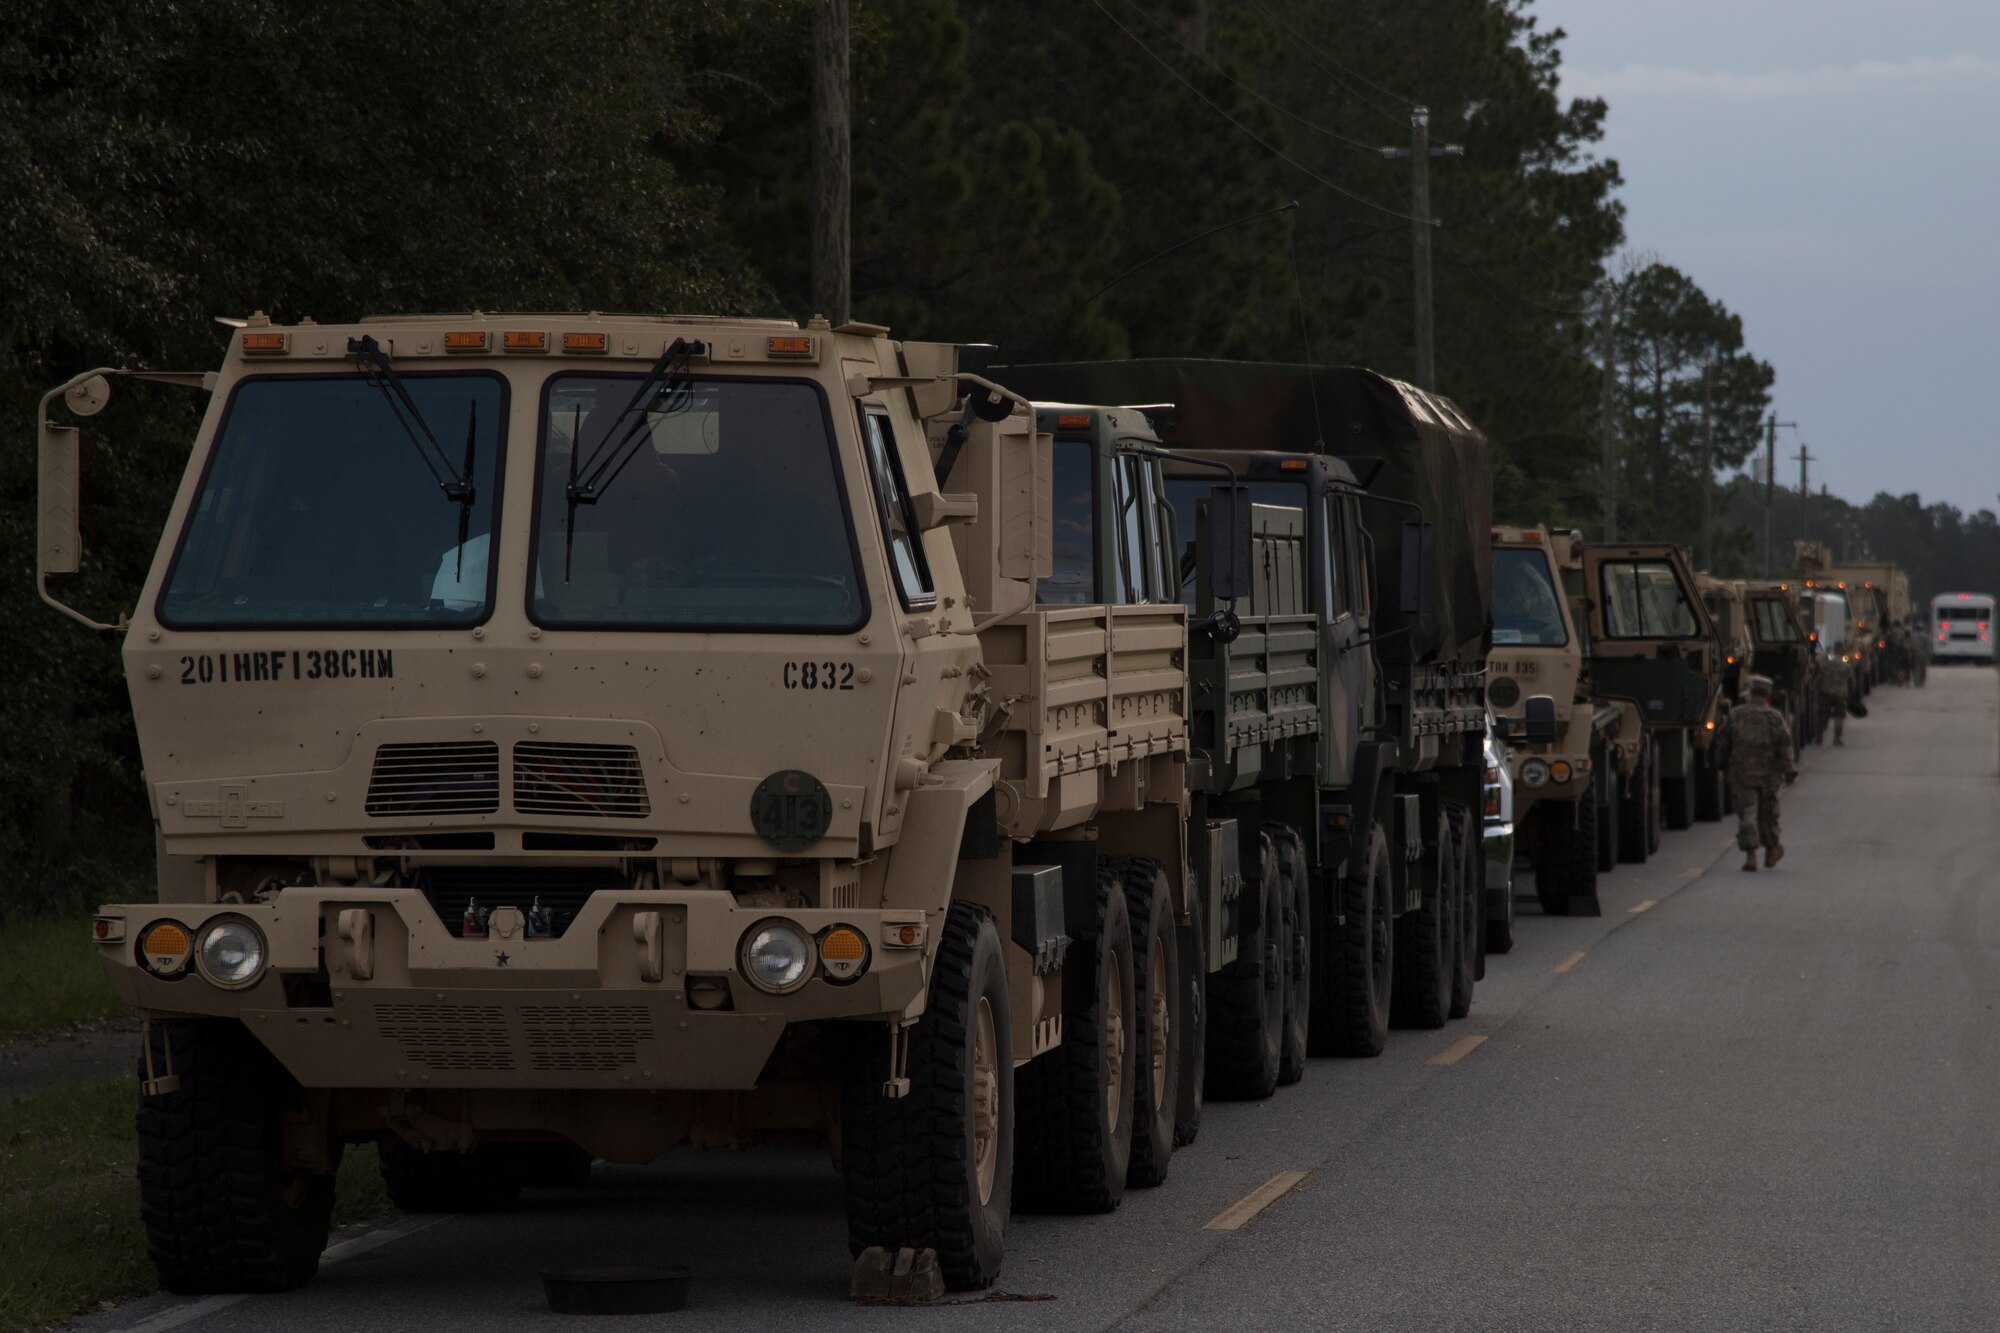 U.S. Army National Guard vehicles from Joint Task Force 781st Chemical, Biological, Radiological, Nuclear and Explosive Response Package and 48th Infantry Brigade Combat Team park along Stone Road, Sept., 12, 2017, at Moody Air Force Base, Ga. Units from the 48th IBCT and JTF 781st CERFP stayed the night at Moody before heading to Orlando, Fla., to provide humanitarian relief for the victims of Hurricane Irma. (U.S. Air Force photo by Staff Sgt. Eric Summers Jr.)